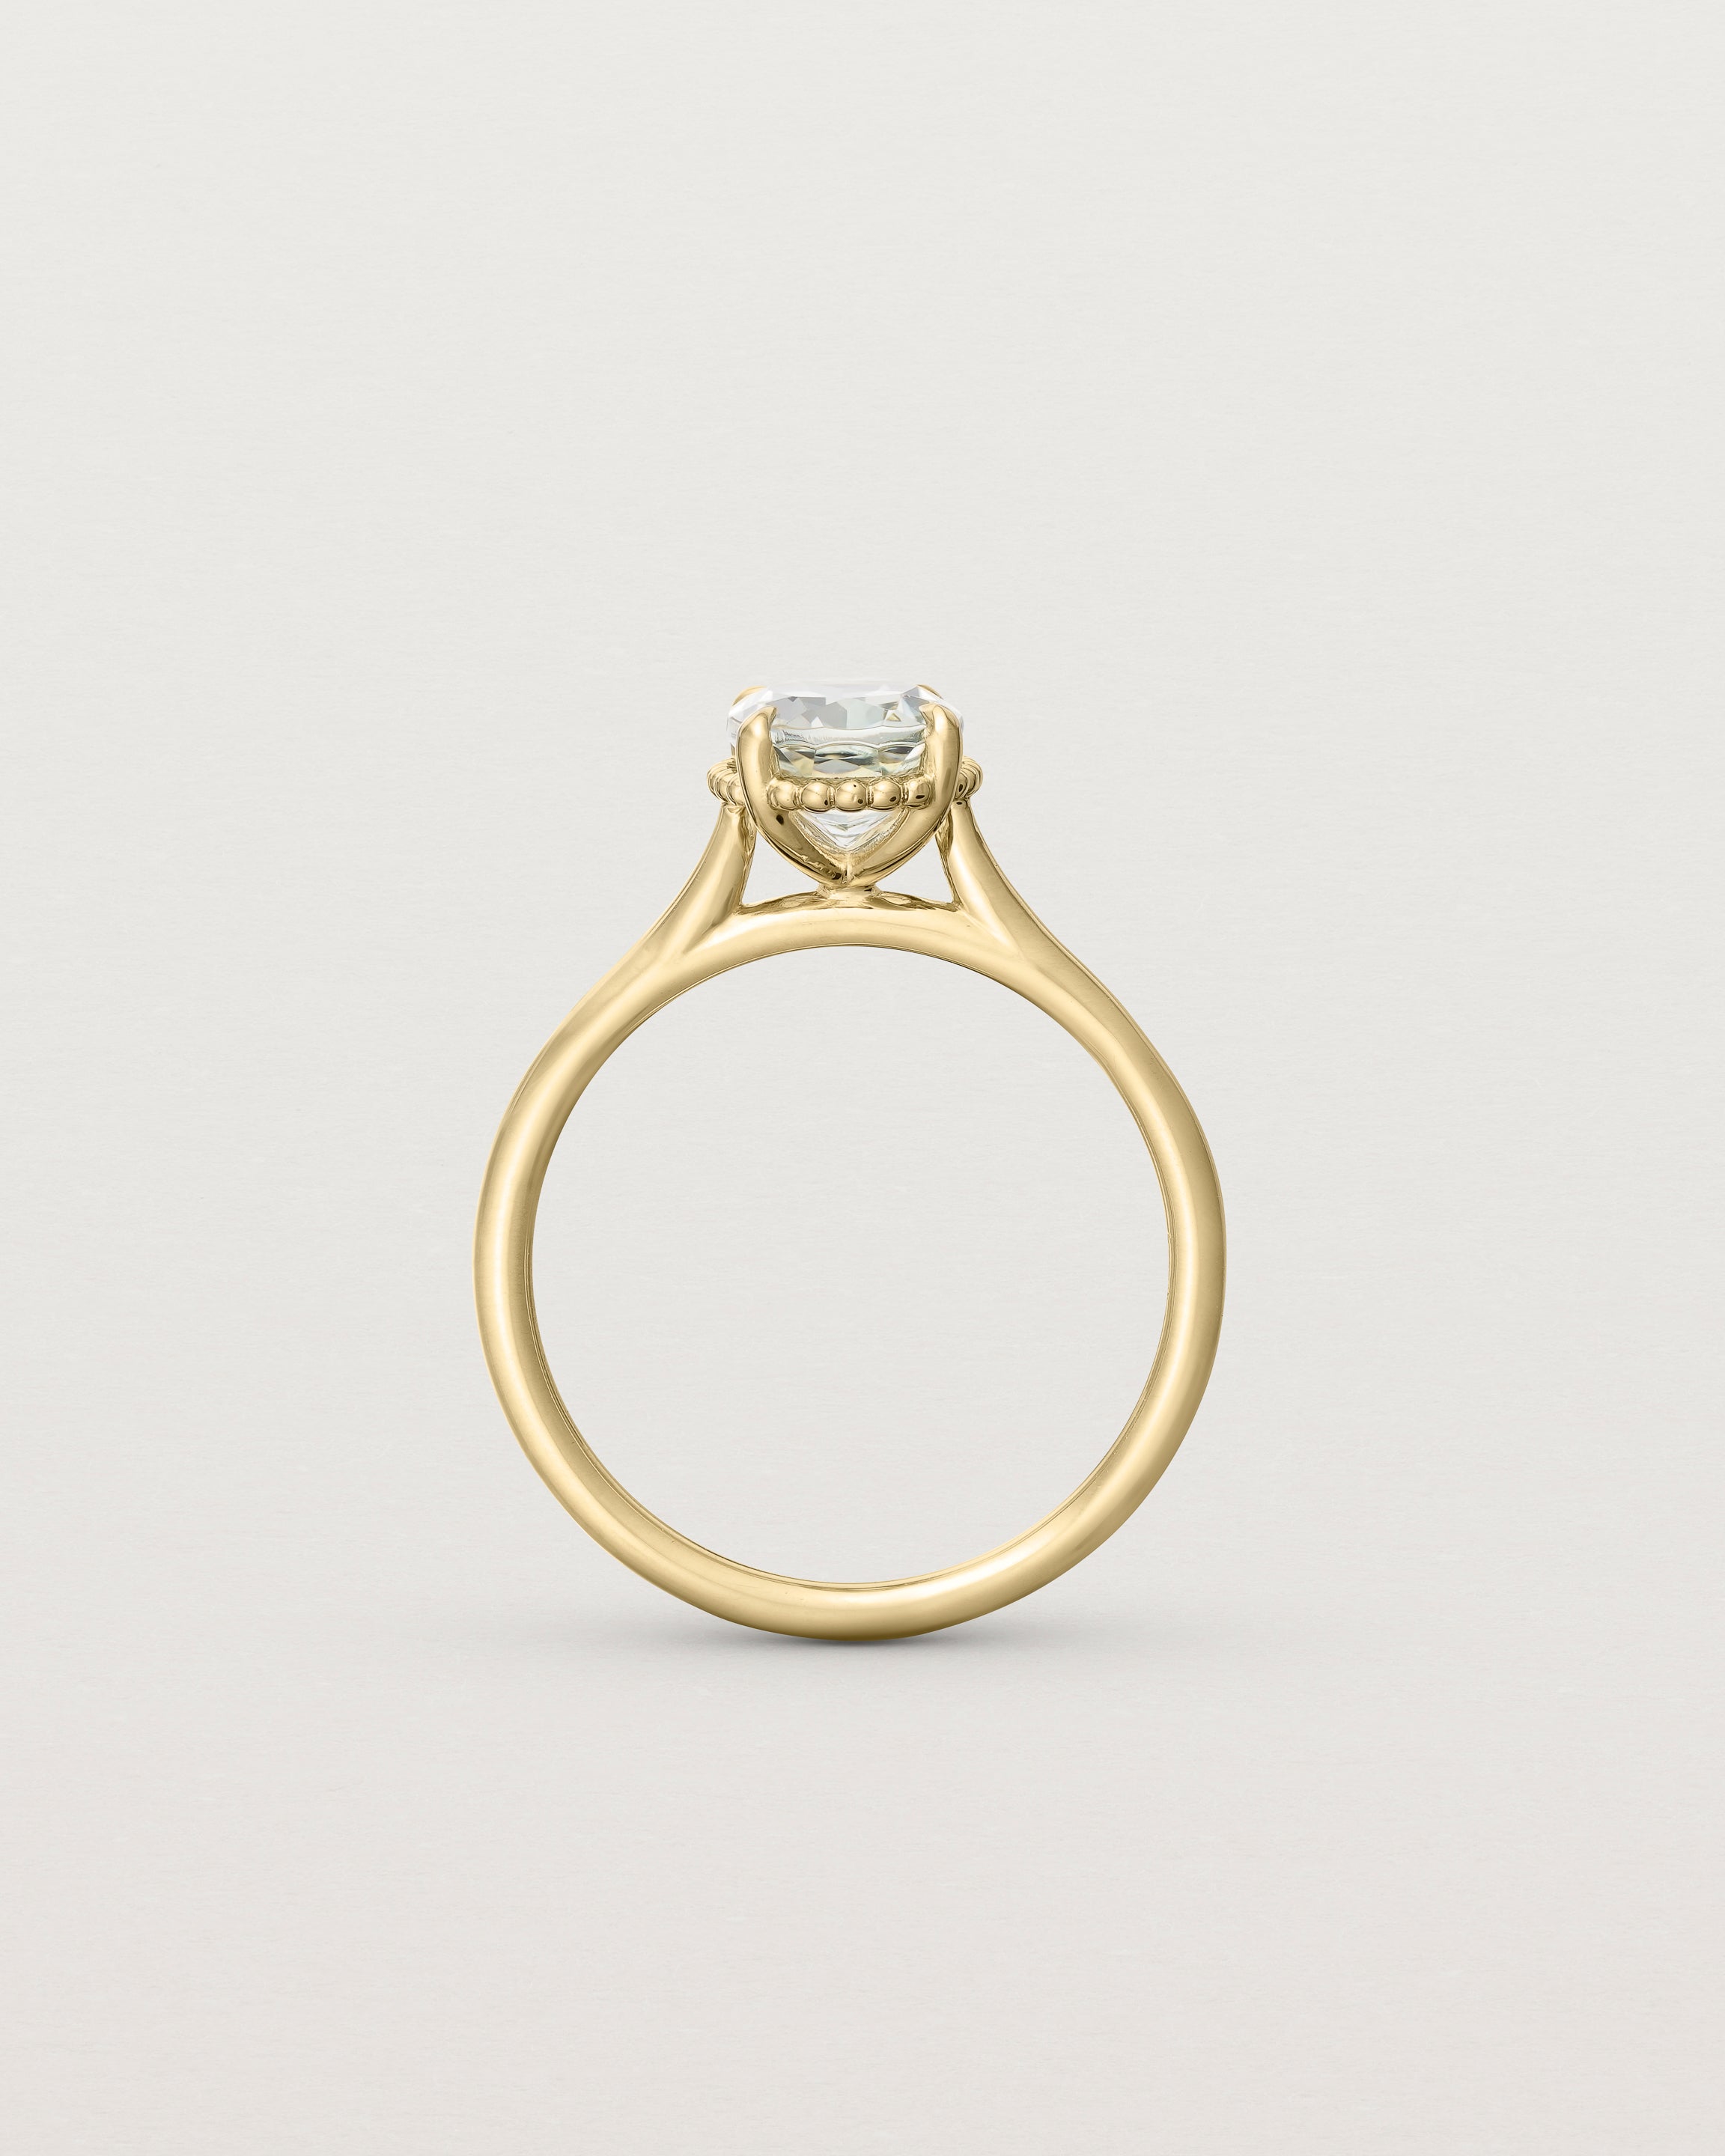 Standing view of the Thea Oval Solitaire | Green Amethyst in yellow gold.